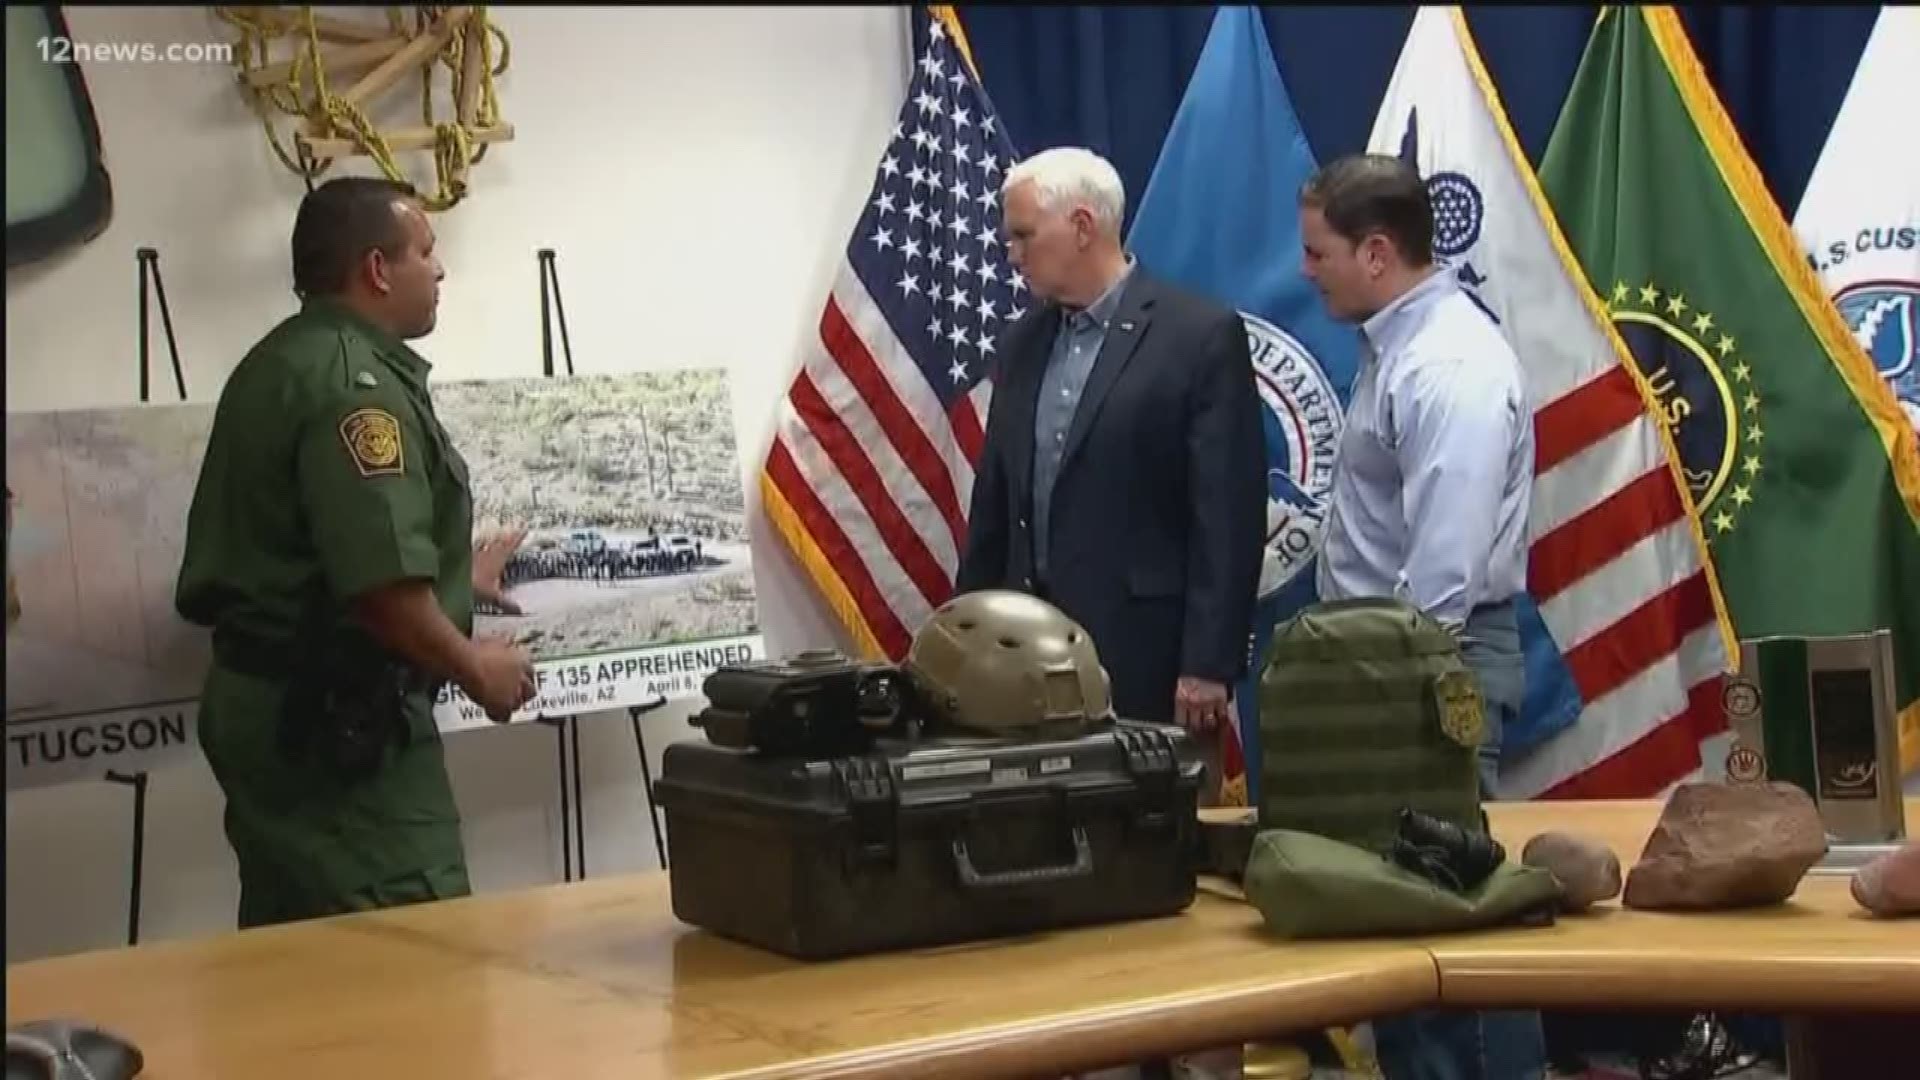 Vice President Mike Pence landed in Tucson Thursday afternoon to tour the Nogales border. He got a briefing at the Border Patrol station there.